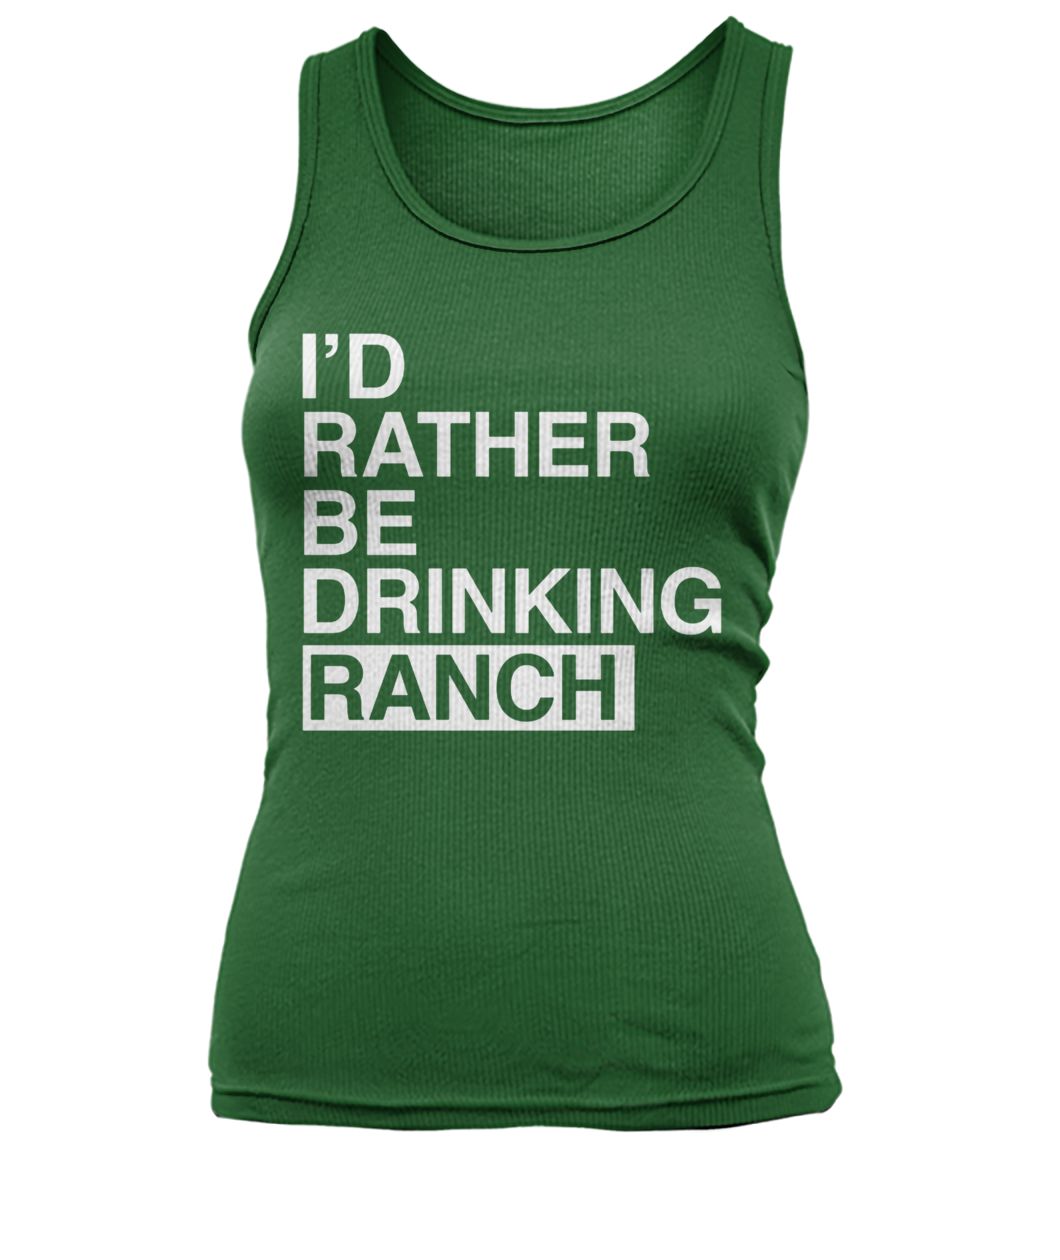 I'd rather be drinking ranch women's tank top